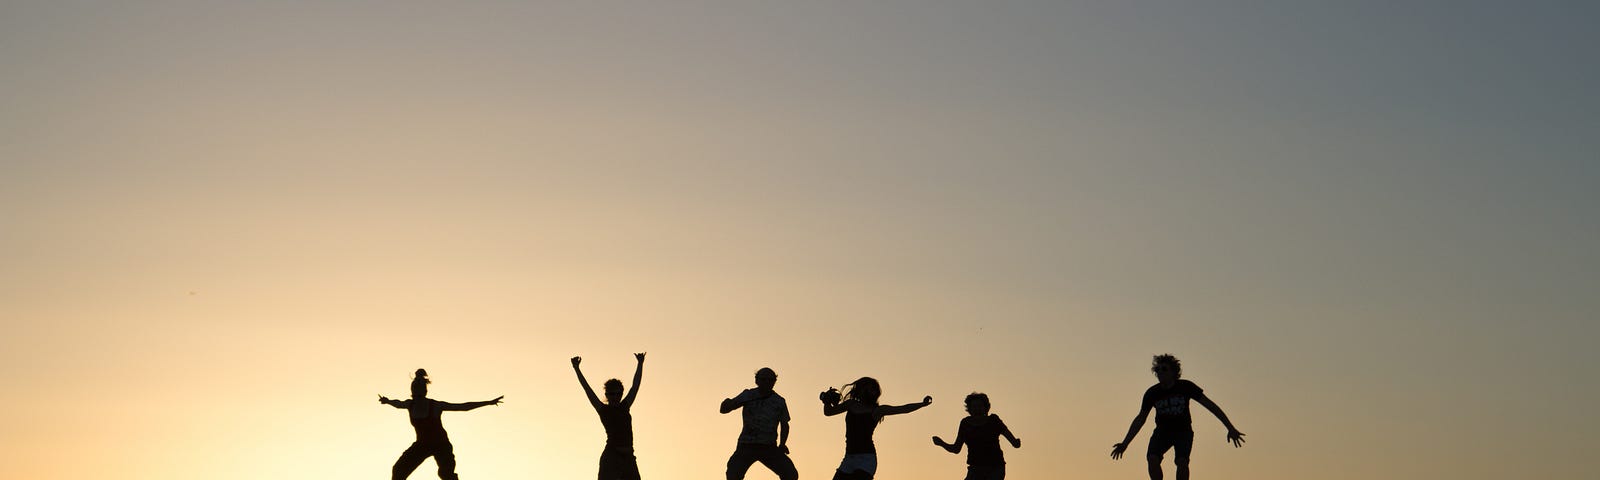 Six young adults (in silhouette) jump into the air, with sun setting behind. Physical activity is associated with a lower risk of dementia.